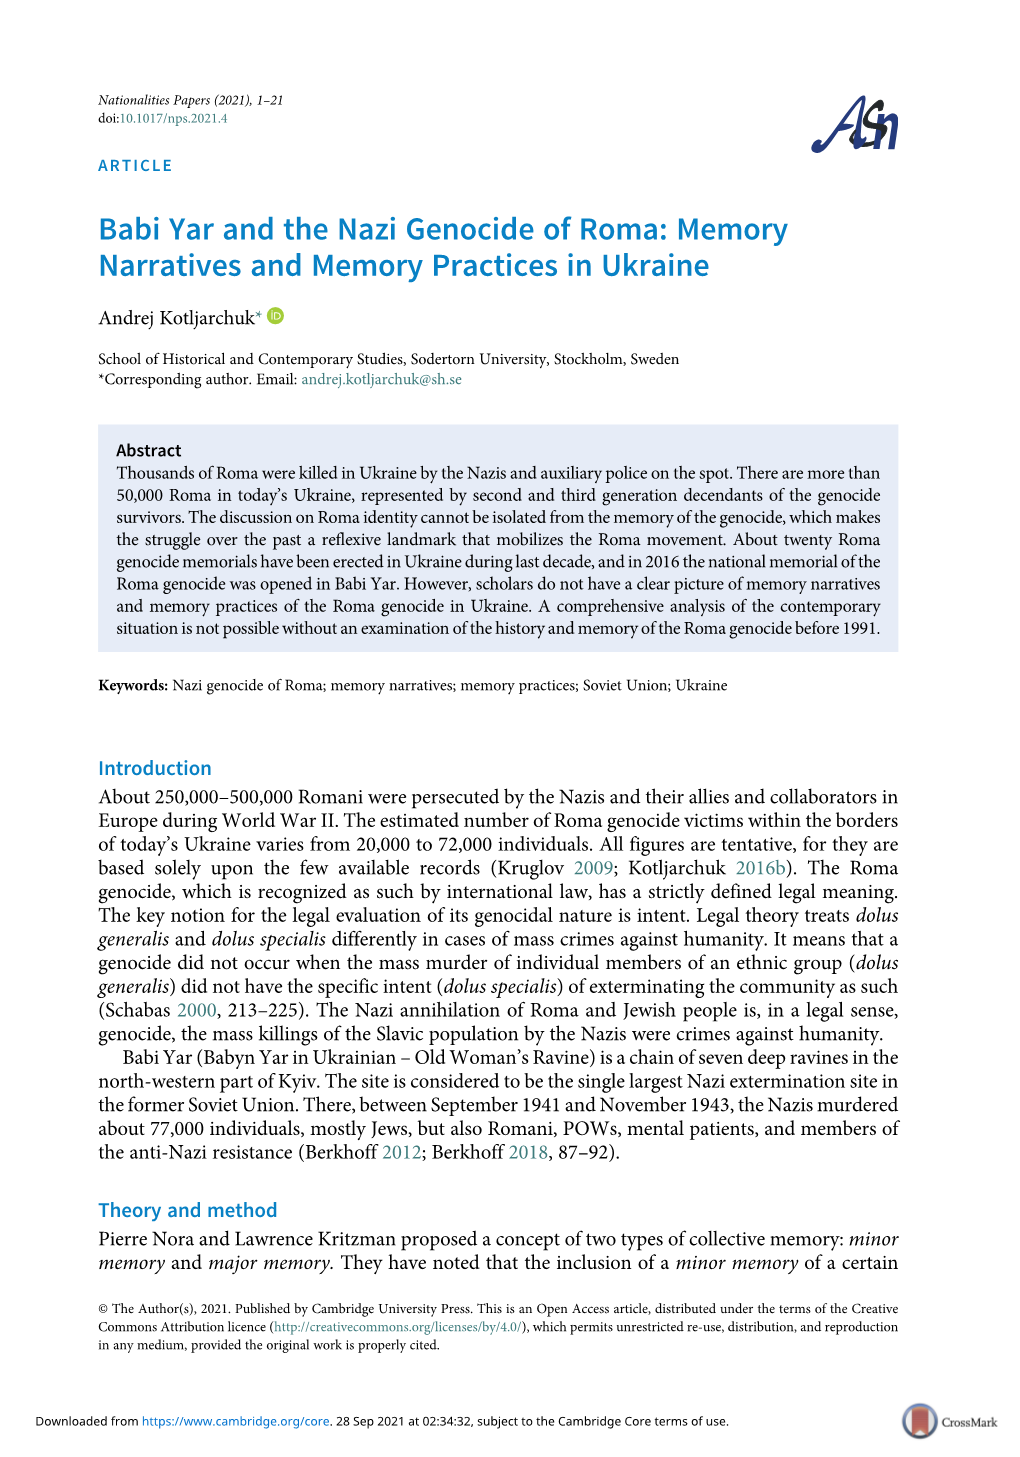 Babi Yar and the Nazi Genocide of Roma: Memory Narratives and Memory Practices in Ukraine